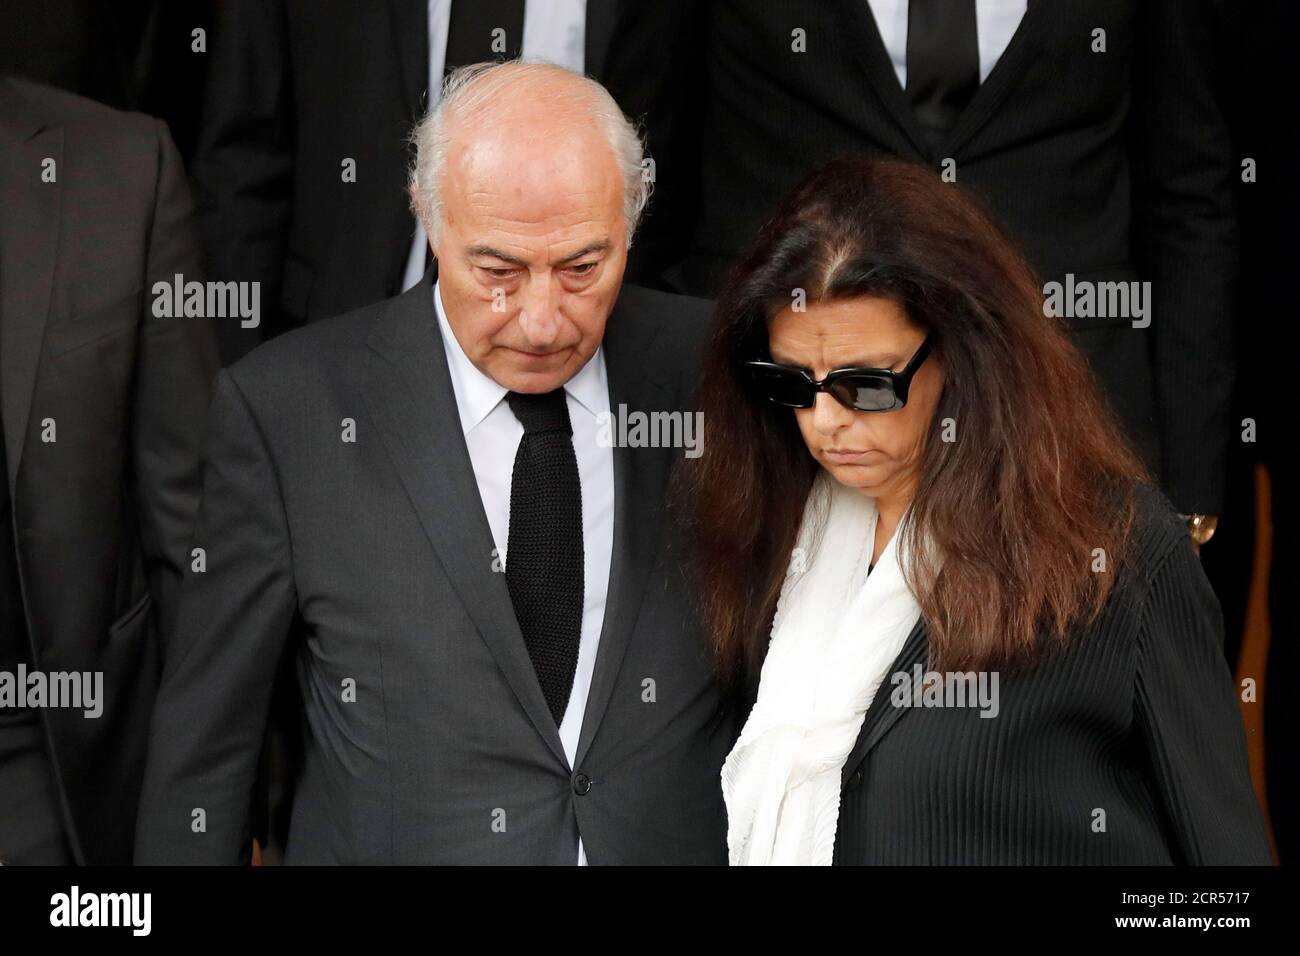 Francoise Bettencourt Meyers (R) and her husband Jean-Pierre Meyers (L)  leave after the funeral ceremony for French businesswoman and billionaire  Liliane Bettencourt,, whose family founded cosmetics giant L'Oreal, in  Neuilly-sur-Seine near Paris,